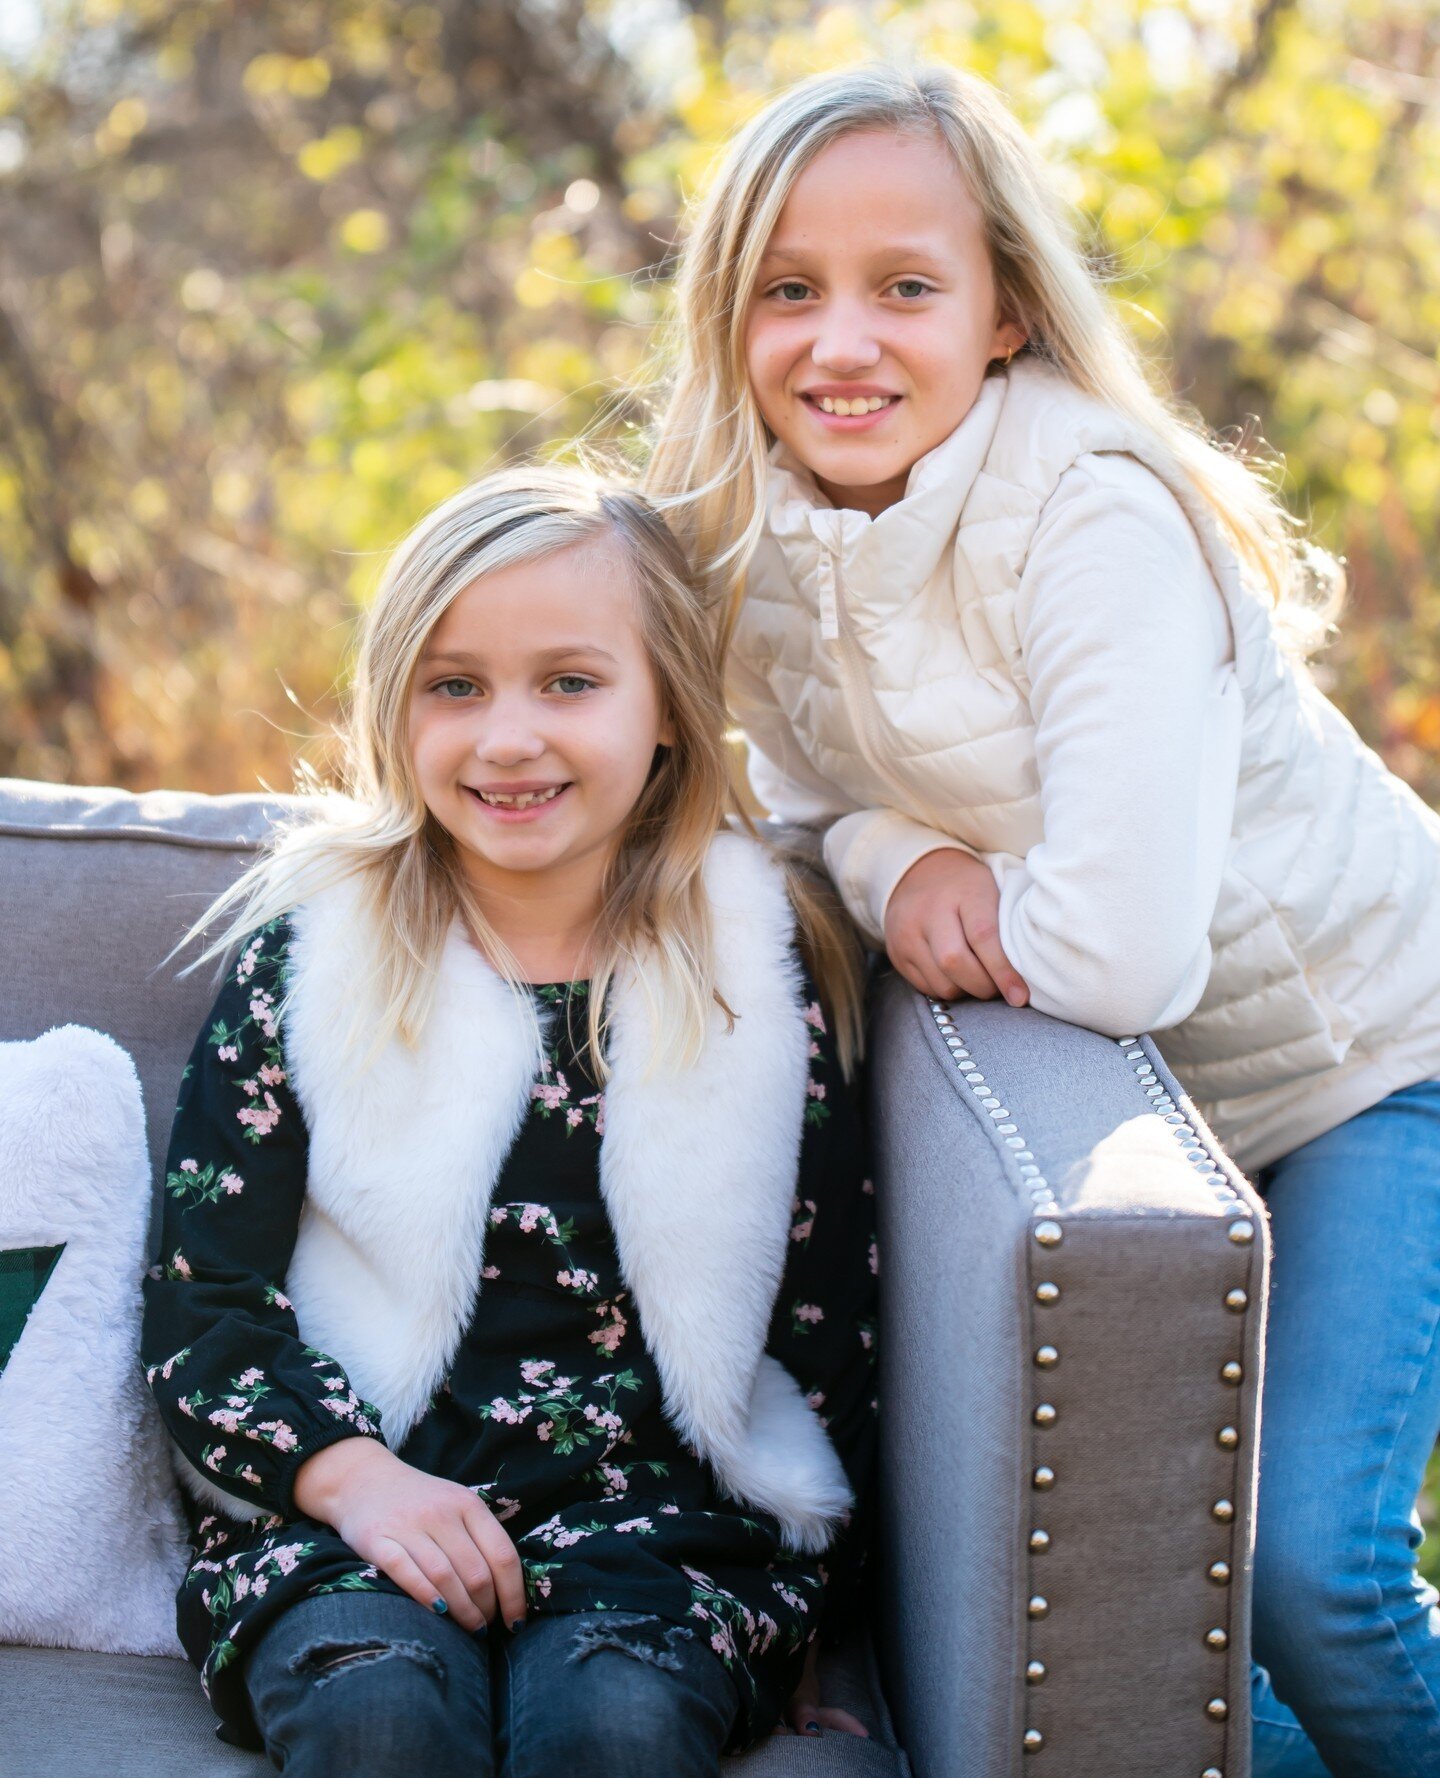 Next week is the outdoor holiday mini session! There are still a couple of spots available if you haven't had the chance to reserve your spot, now's the time! ⁠
⁠
Click the link in my bio to reserve your spot.⁠
⁠
🗓️ DATE: Sessions will take place on